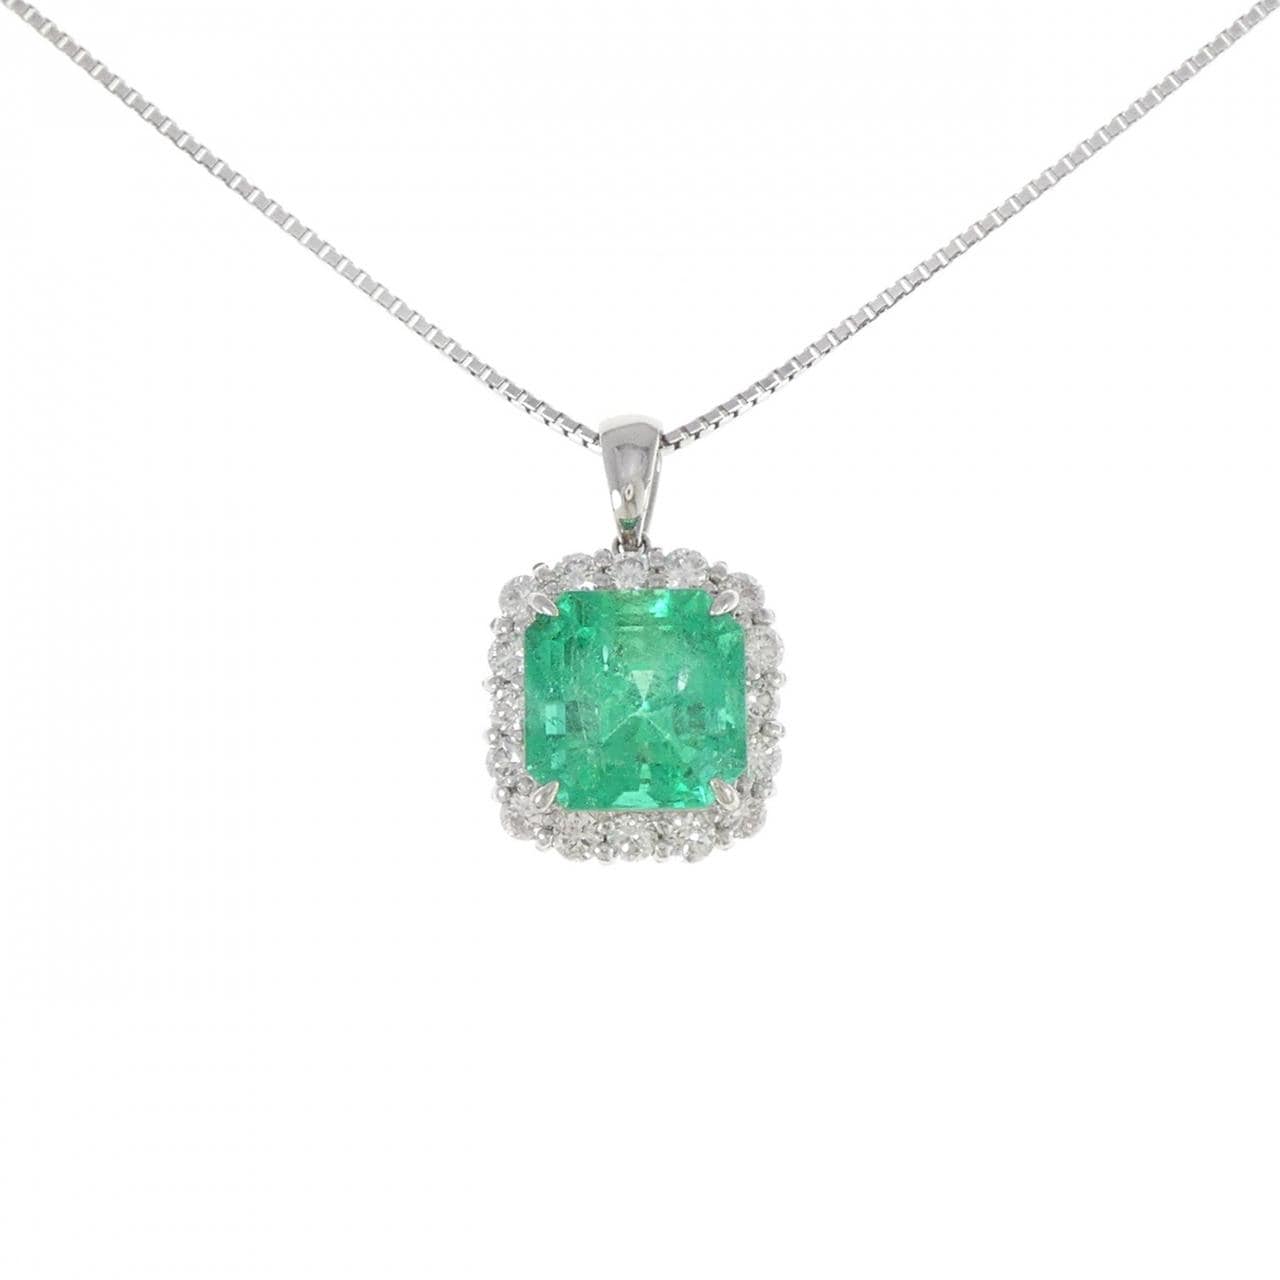 [Remake] PT Emerald Necklace 5.13CT Colombian